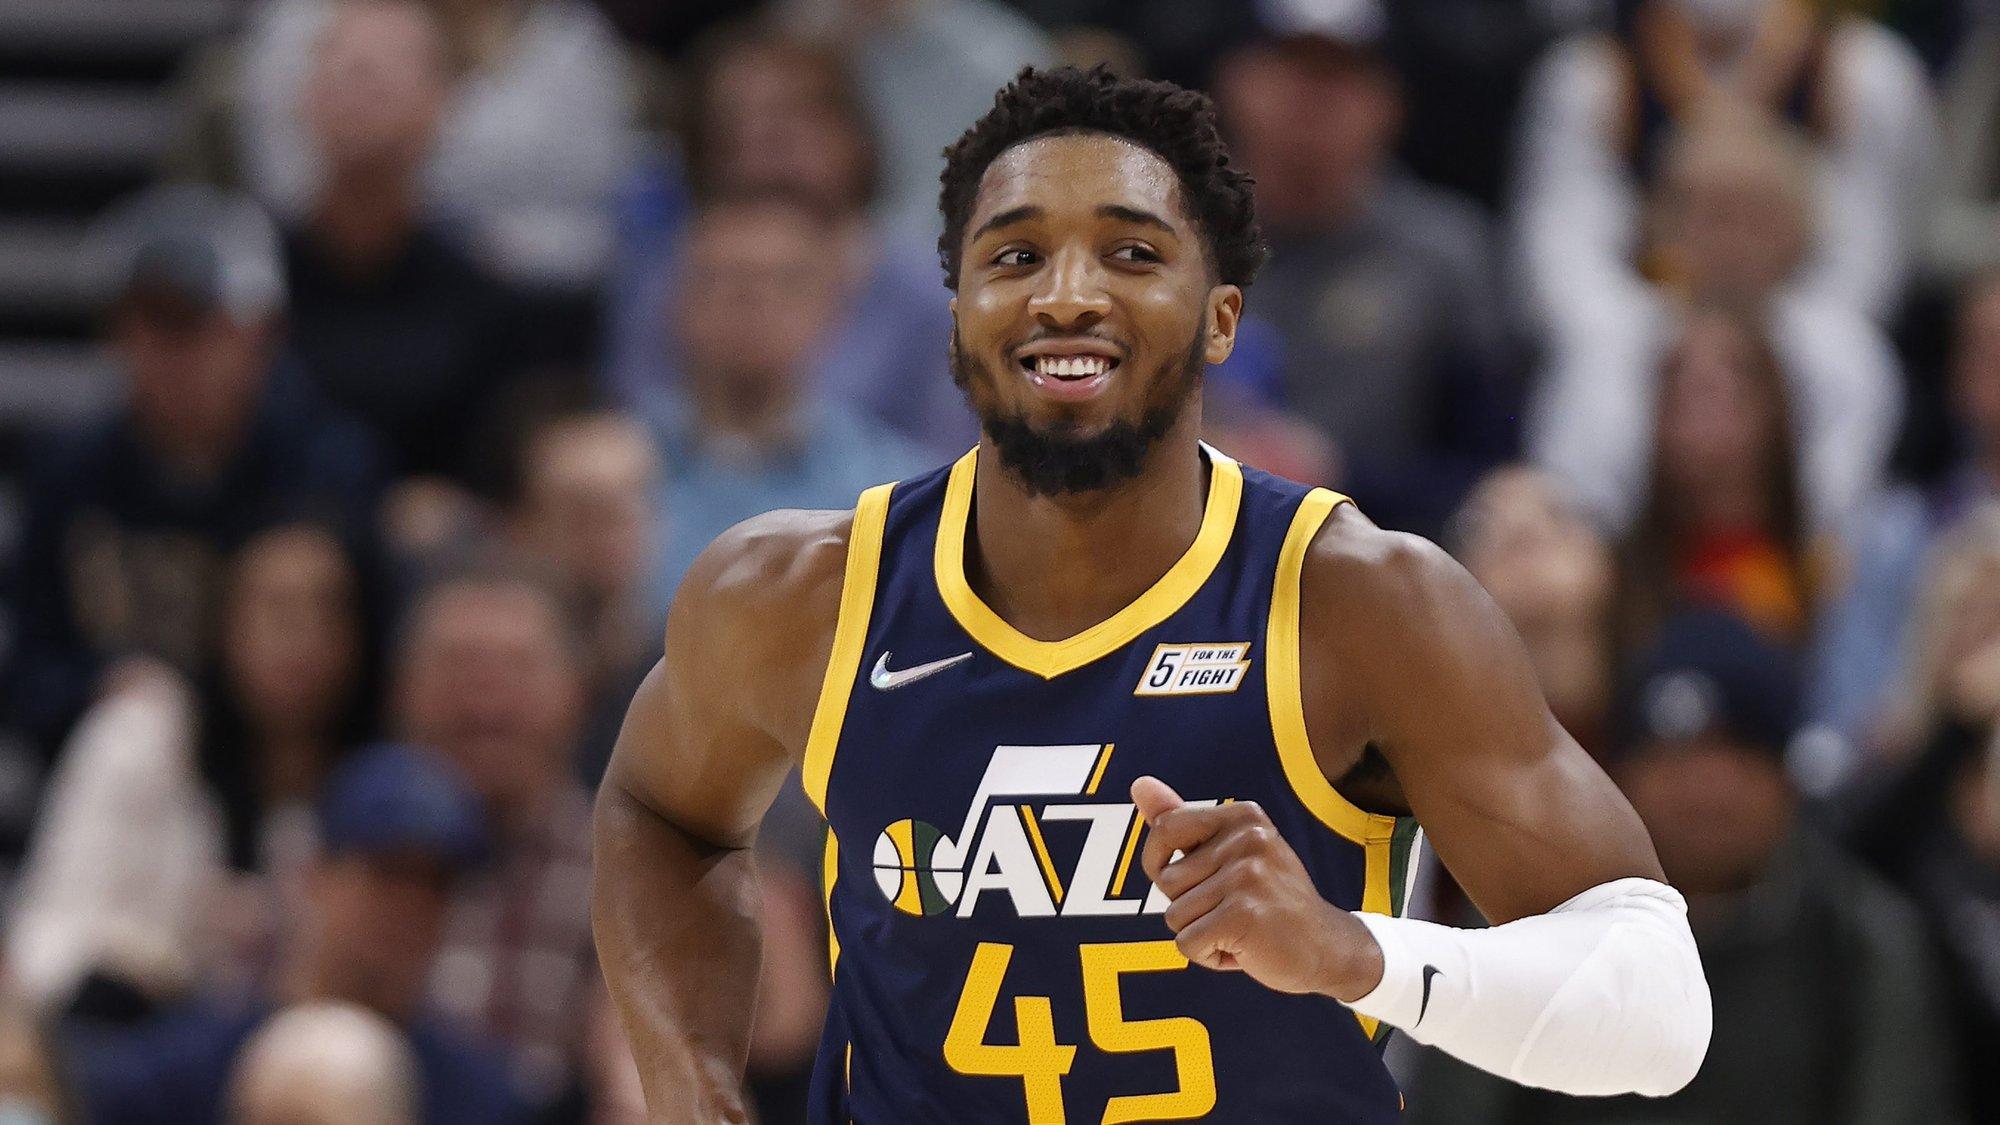 Lakers vs. Jazz March 31 NBA Prediction and Best Bets